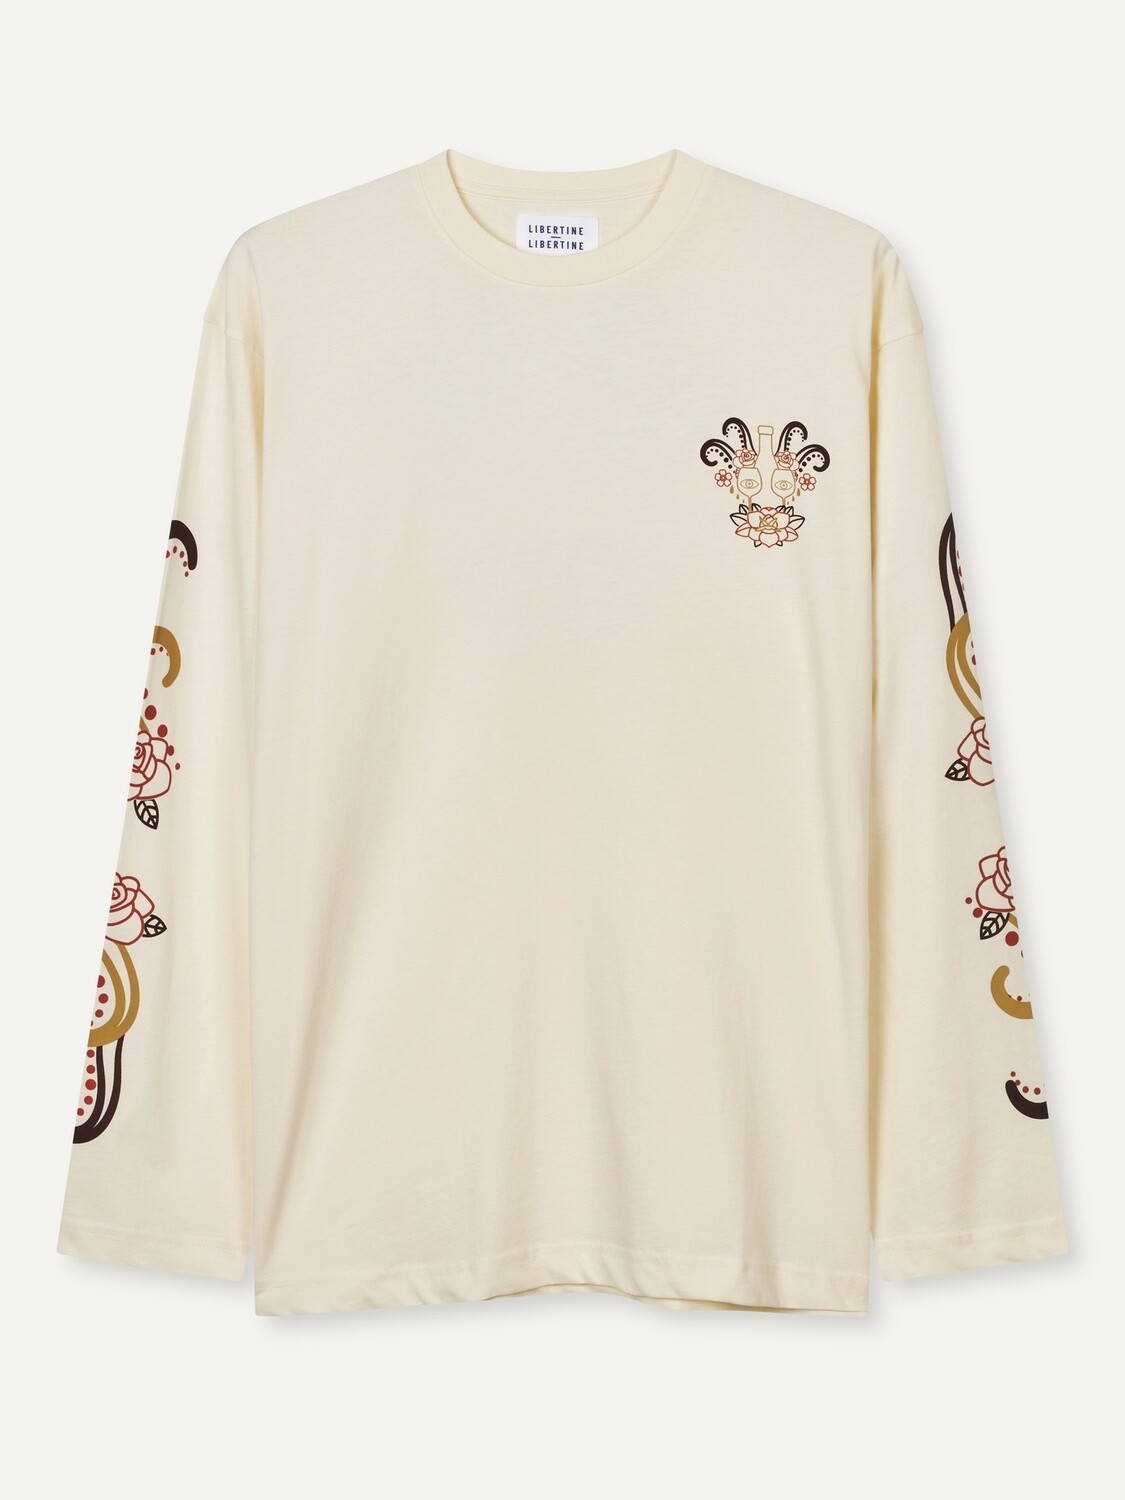 Affirm Tableau Long Sleeve Tee, Size: S